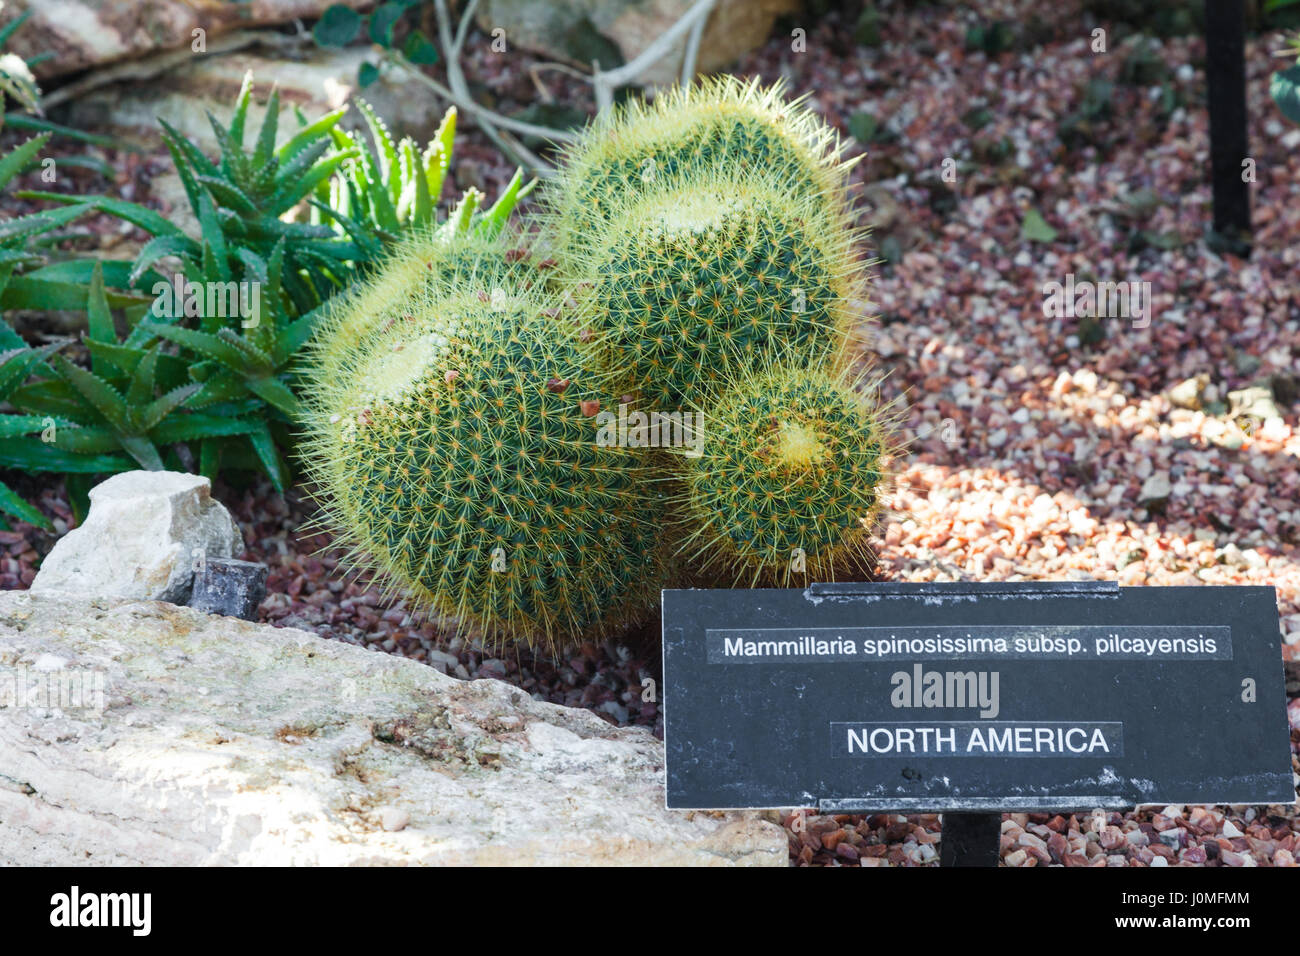 Cactii exhibit at an indoor conservatory Stock Photo